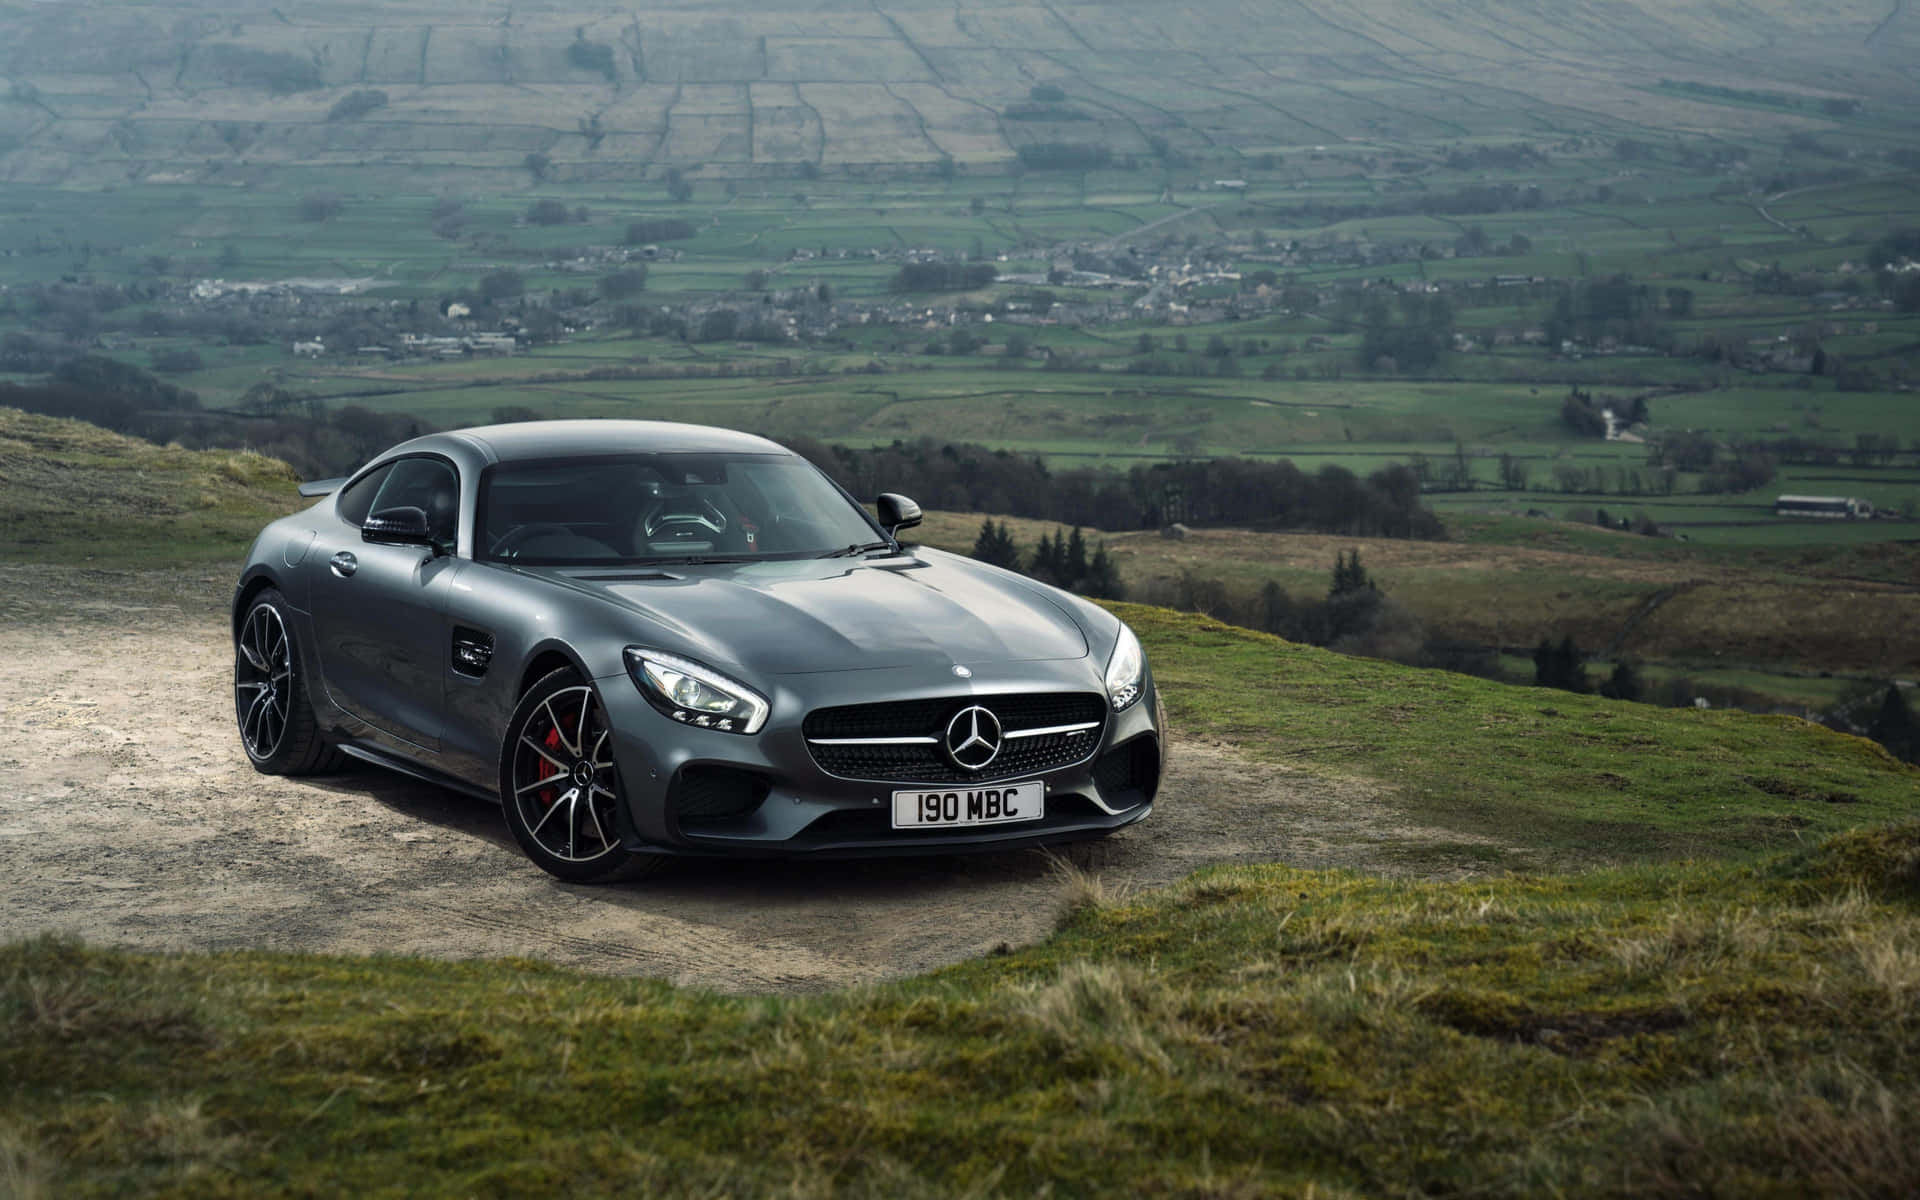 Experience exhilarating performance with the Mercedes AMG GT Wallpaper